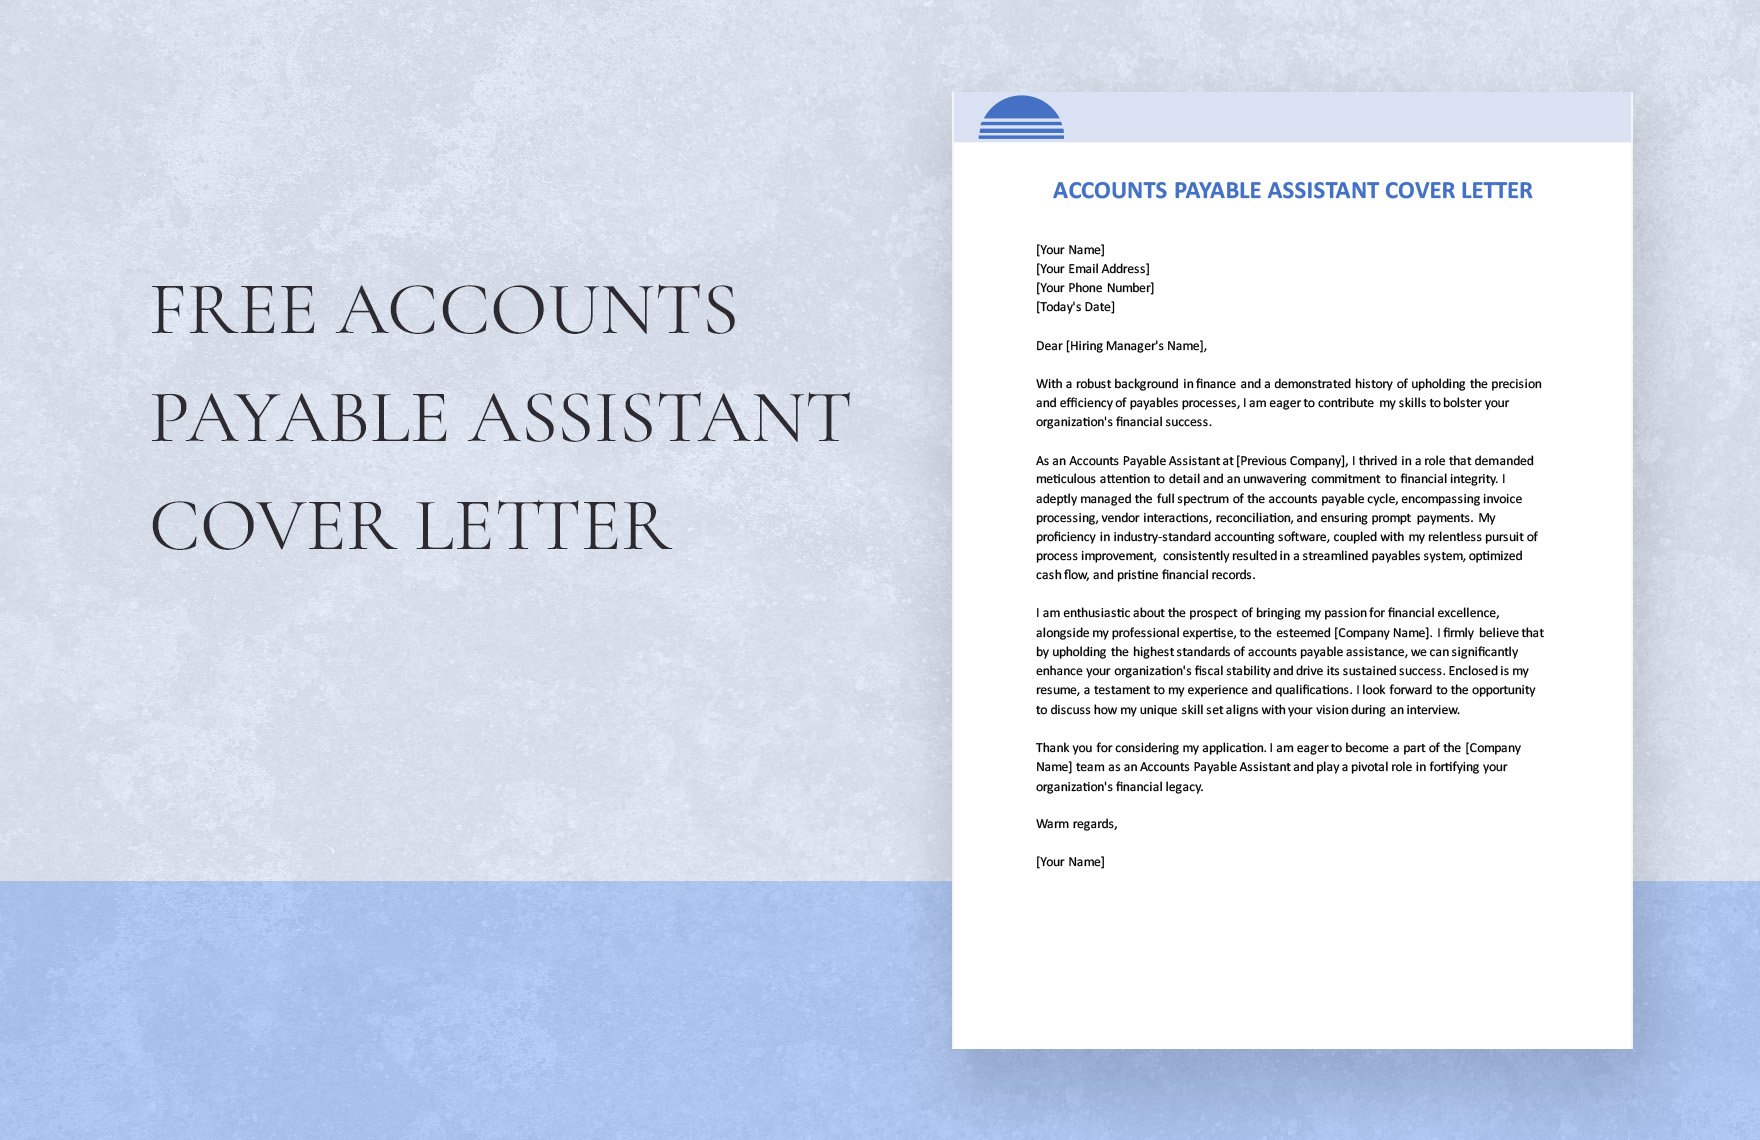 Accounts Payable Assistant Cover Letter in Word, Google Docs, PDF